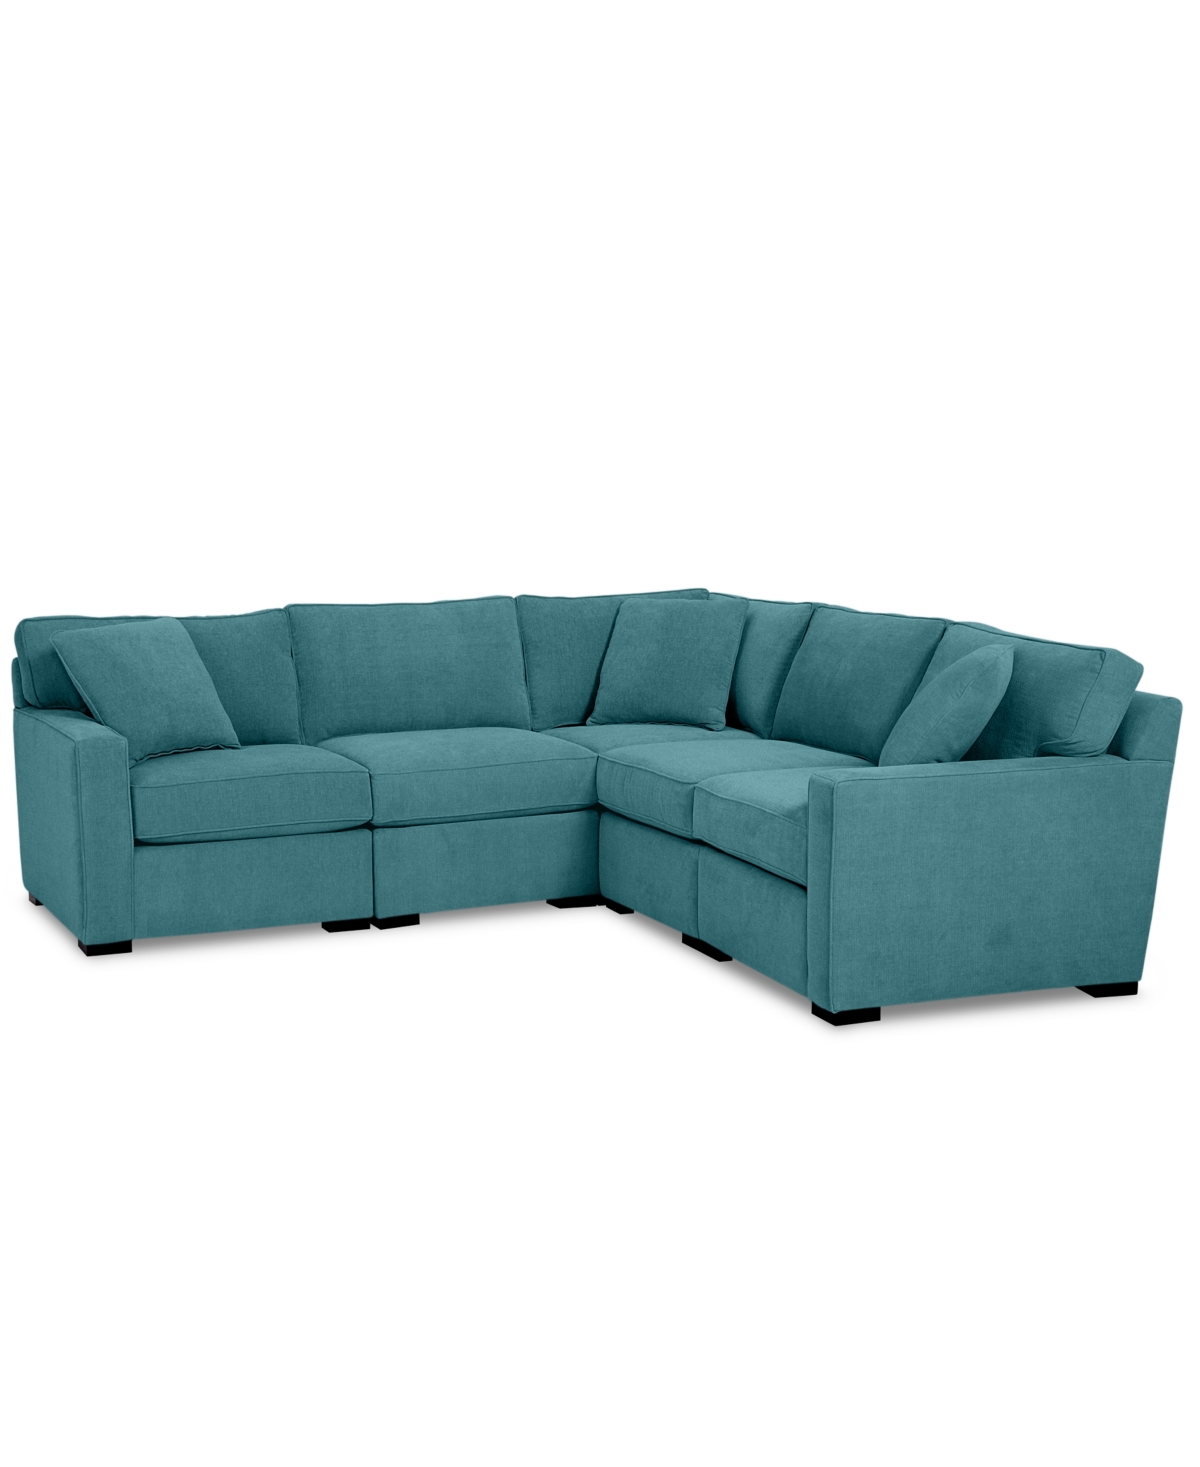 Onbelangrijk toegang Afkorten Furniture Radley 5-Pc. Fabric Chaise Sectional Sofa with Corner Piece,  Created for Macy's & Reviews - Furniture - Macy's